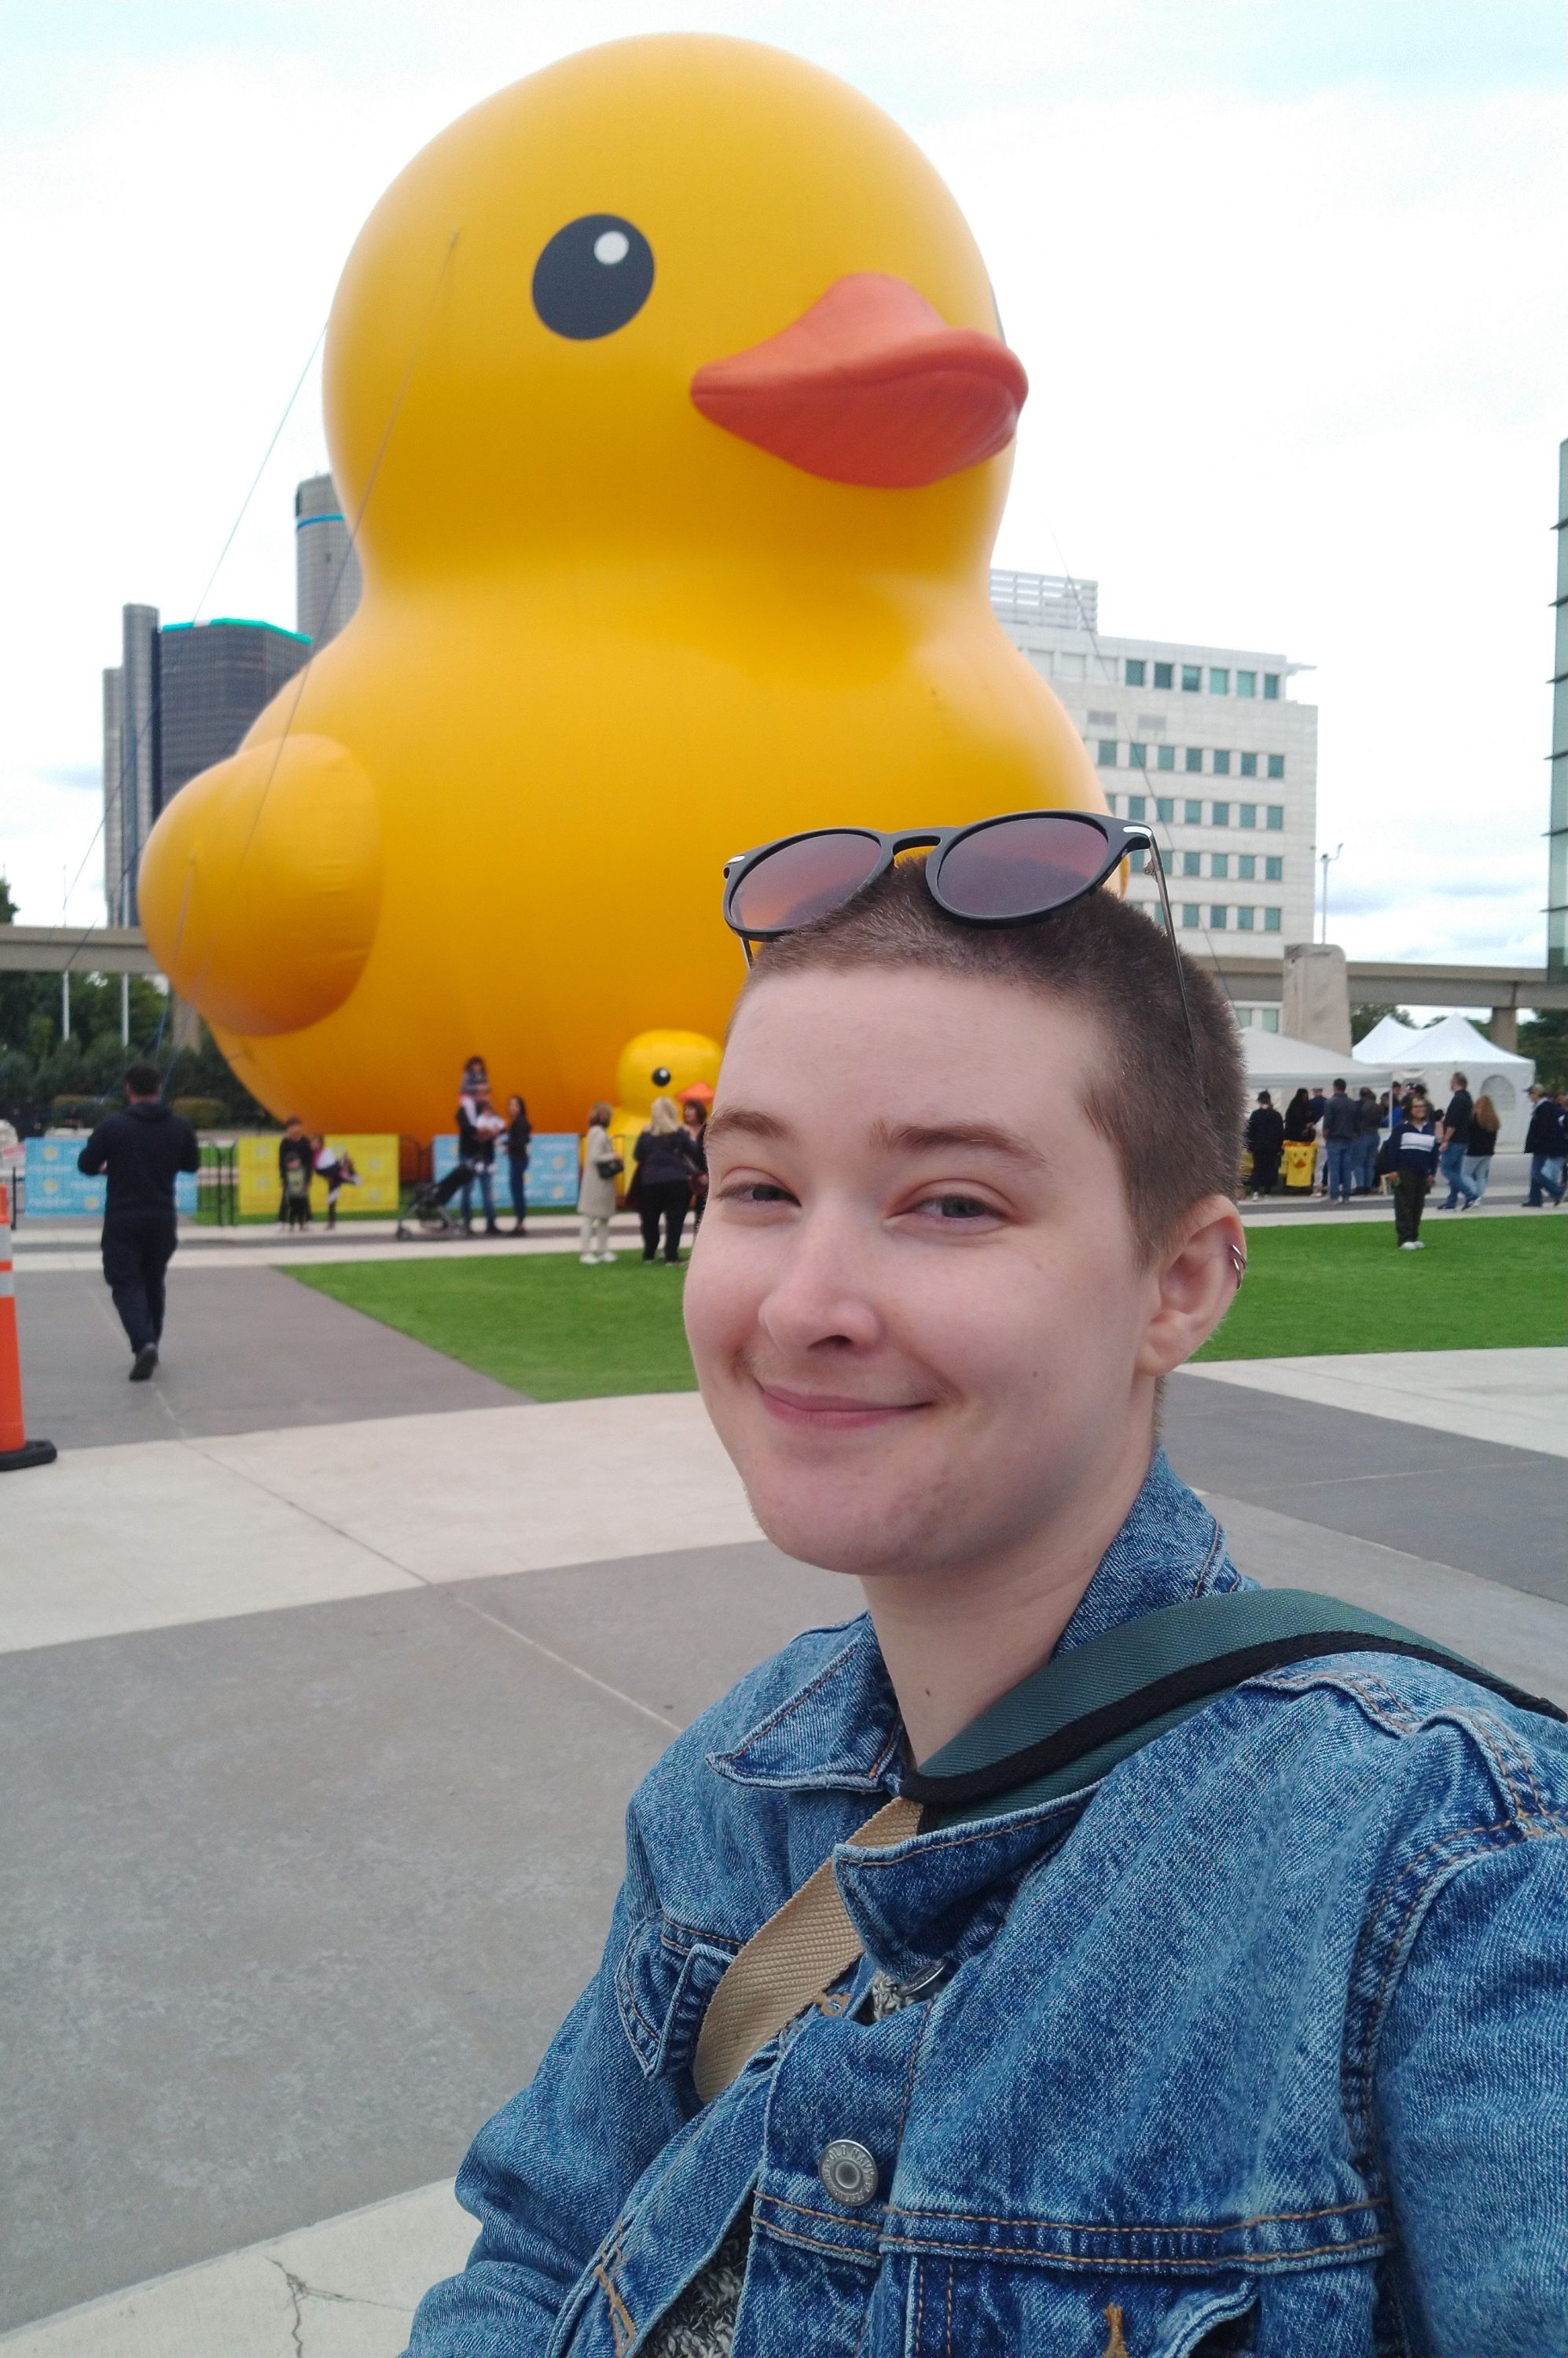 Rebecca Kyer with a large yellow rubber duck